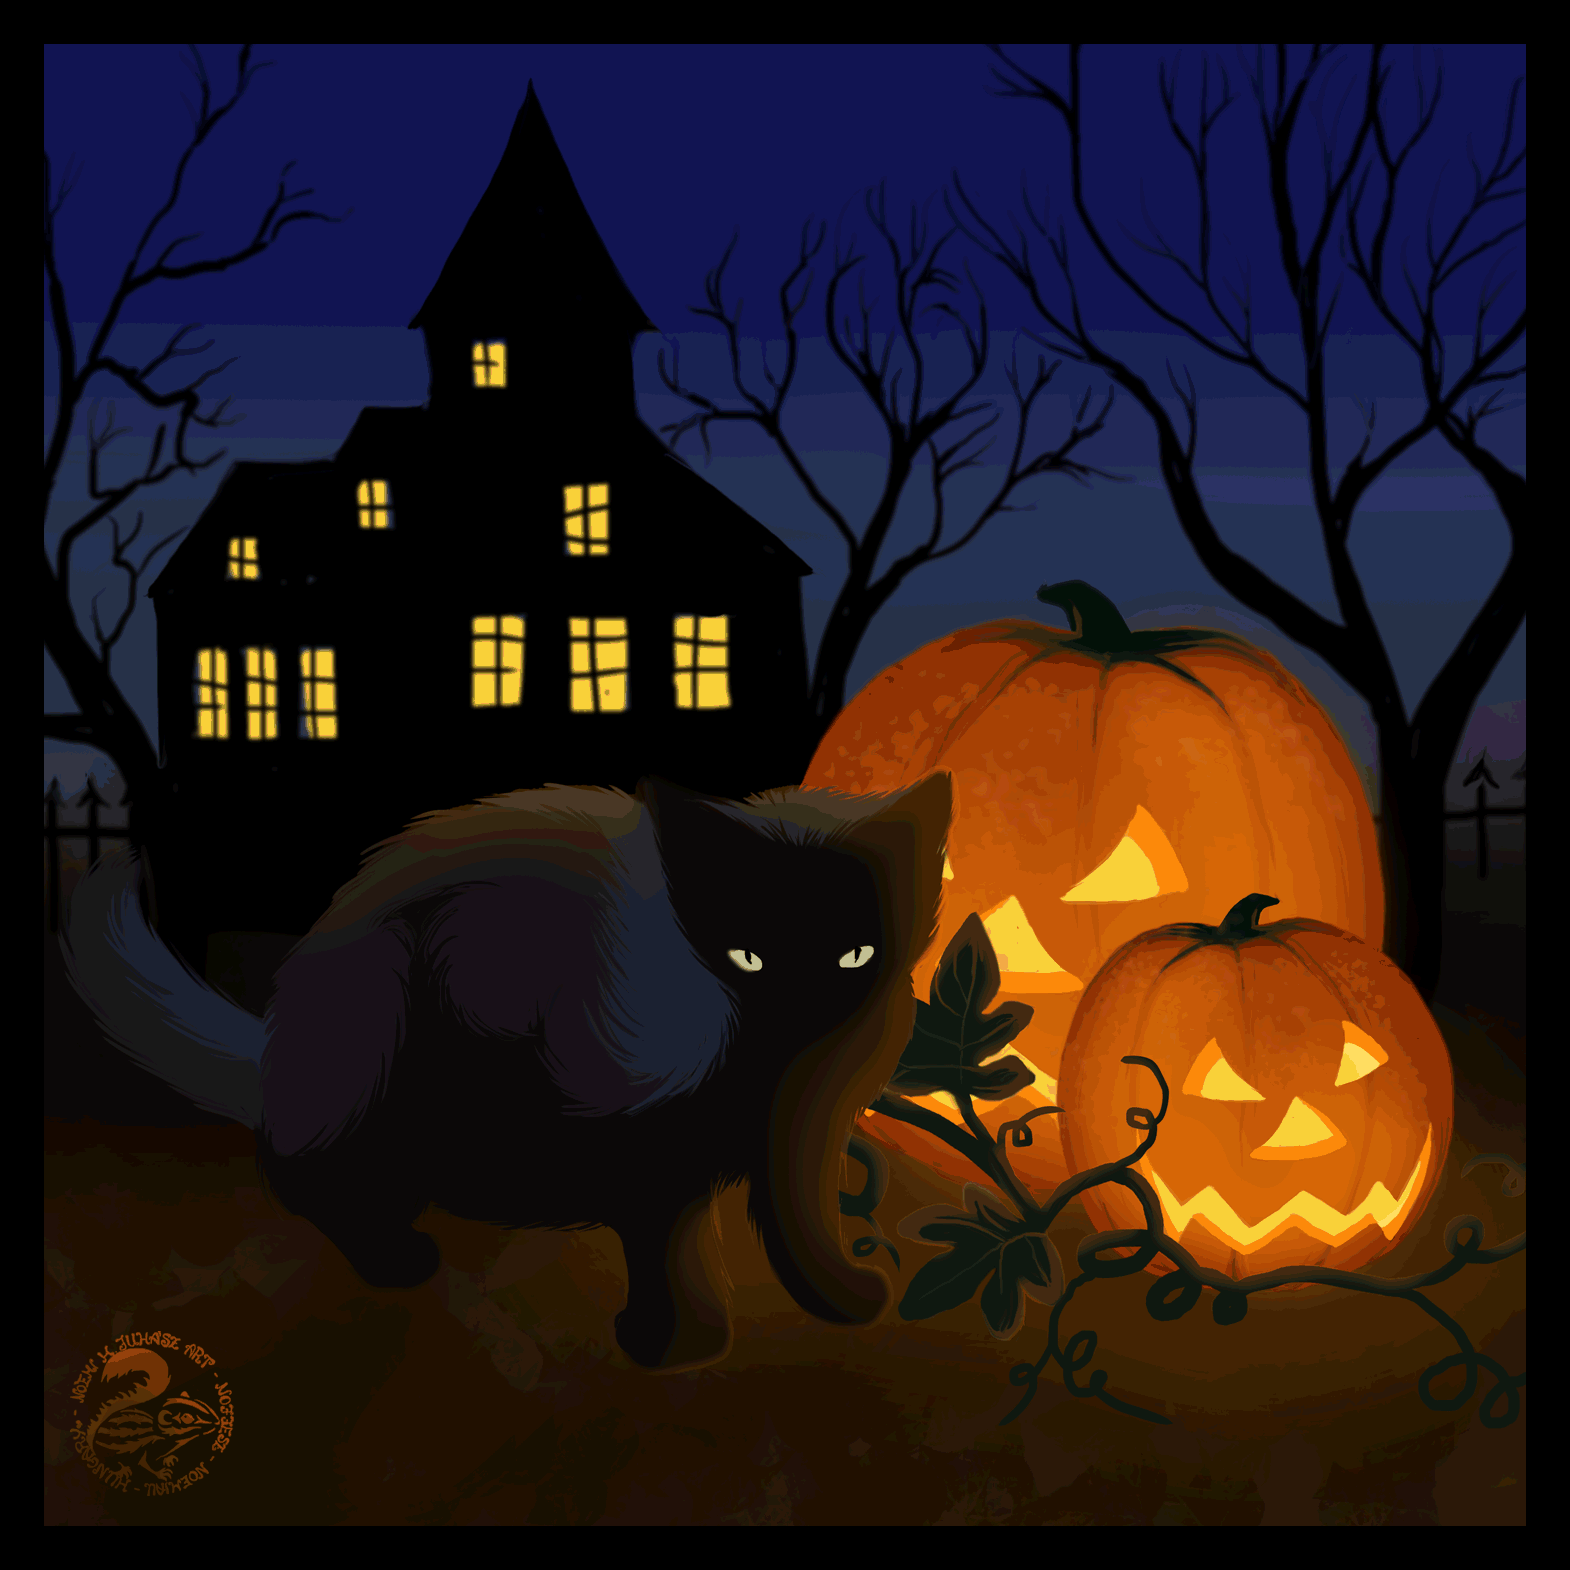 Animated Halloween Pictures - Mystical Halloween Background With Dark ...